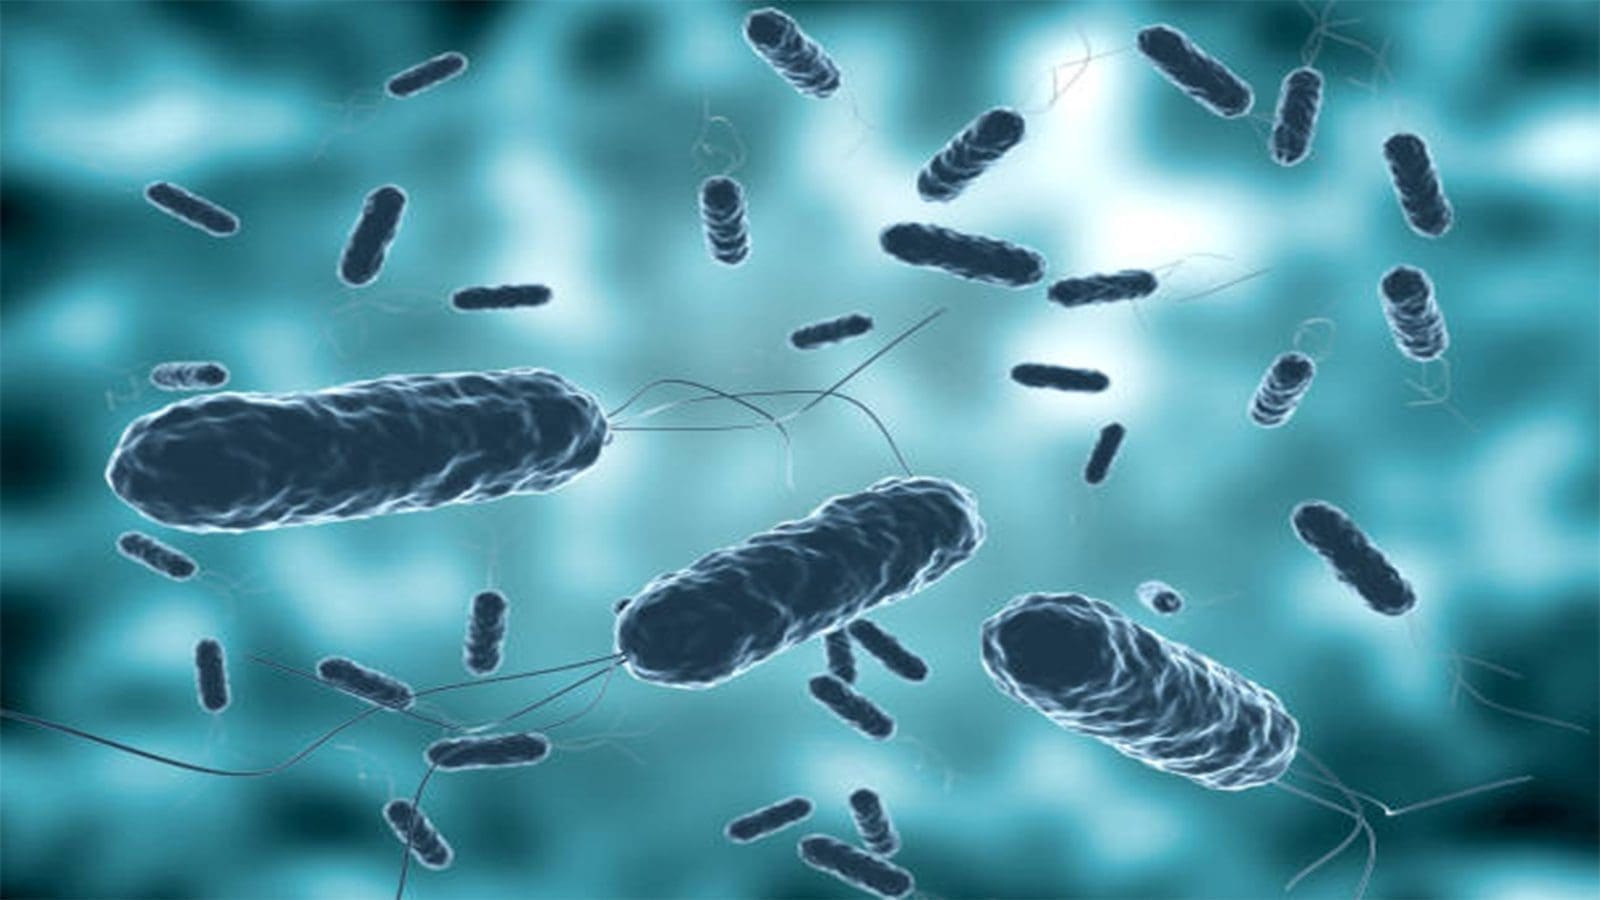 Findings on mode of infection for Vibrio could lead to new treatments development